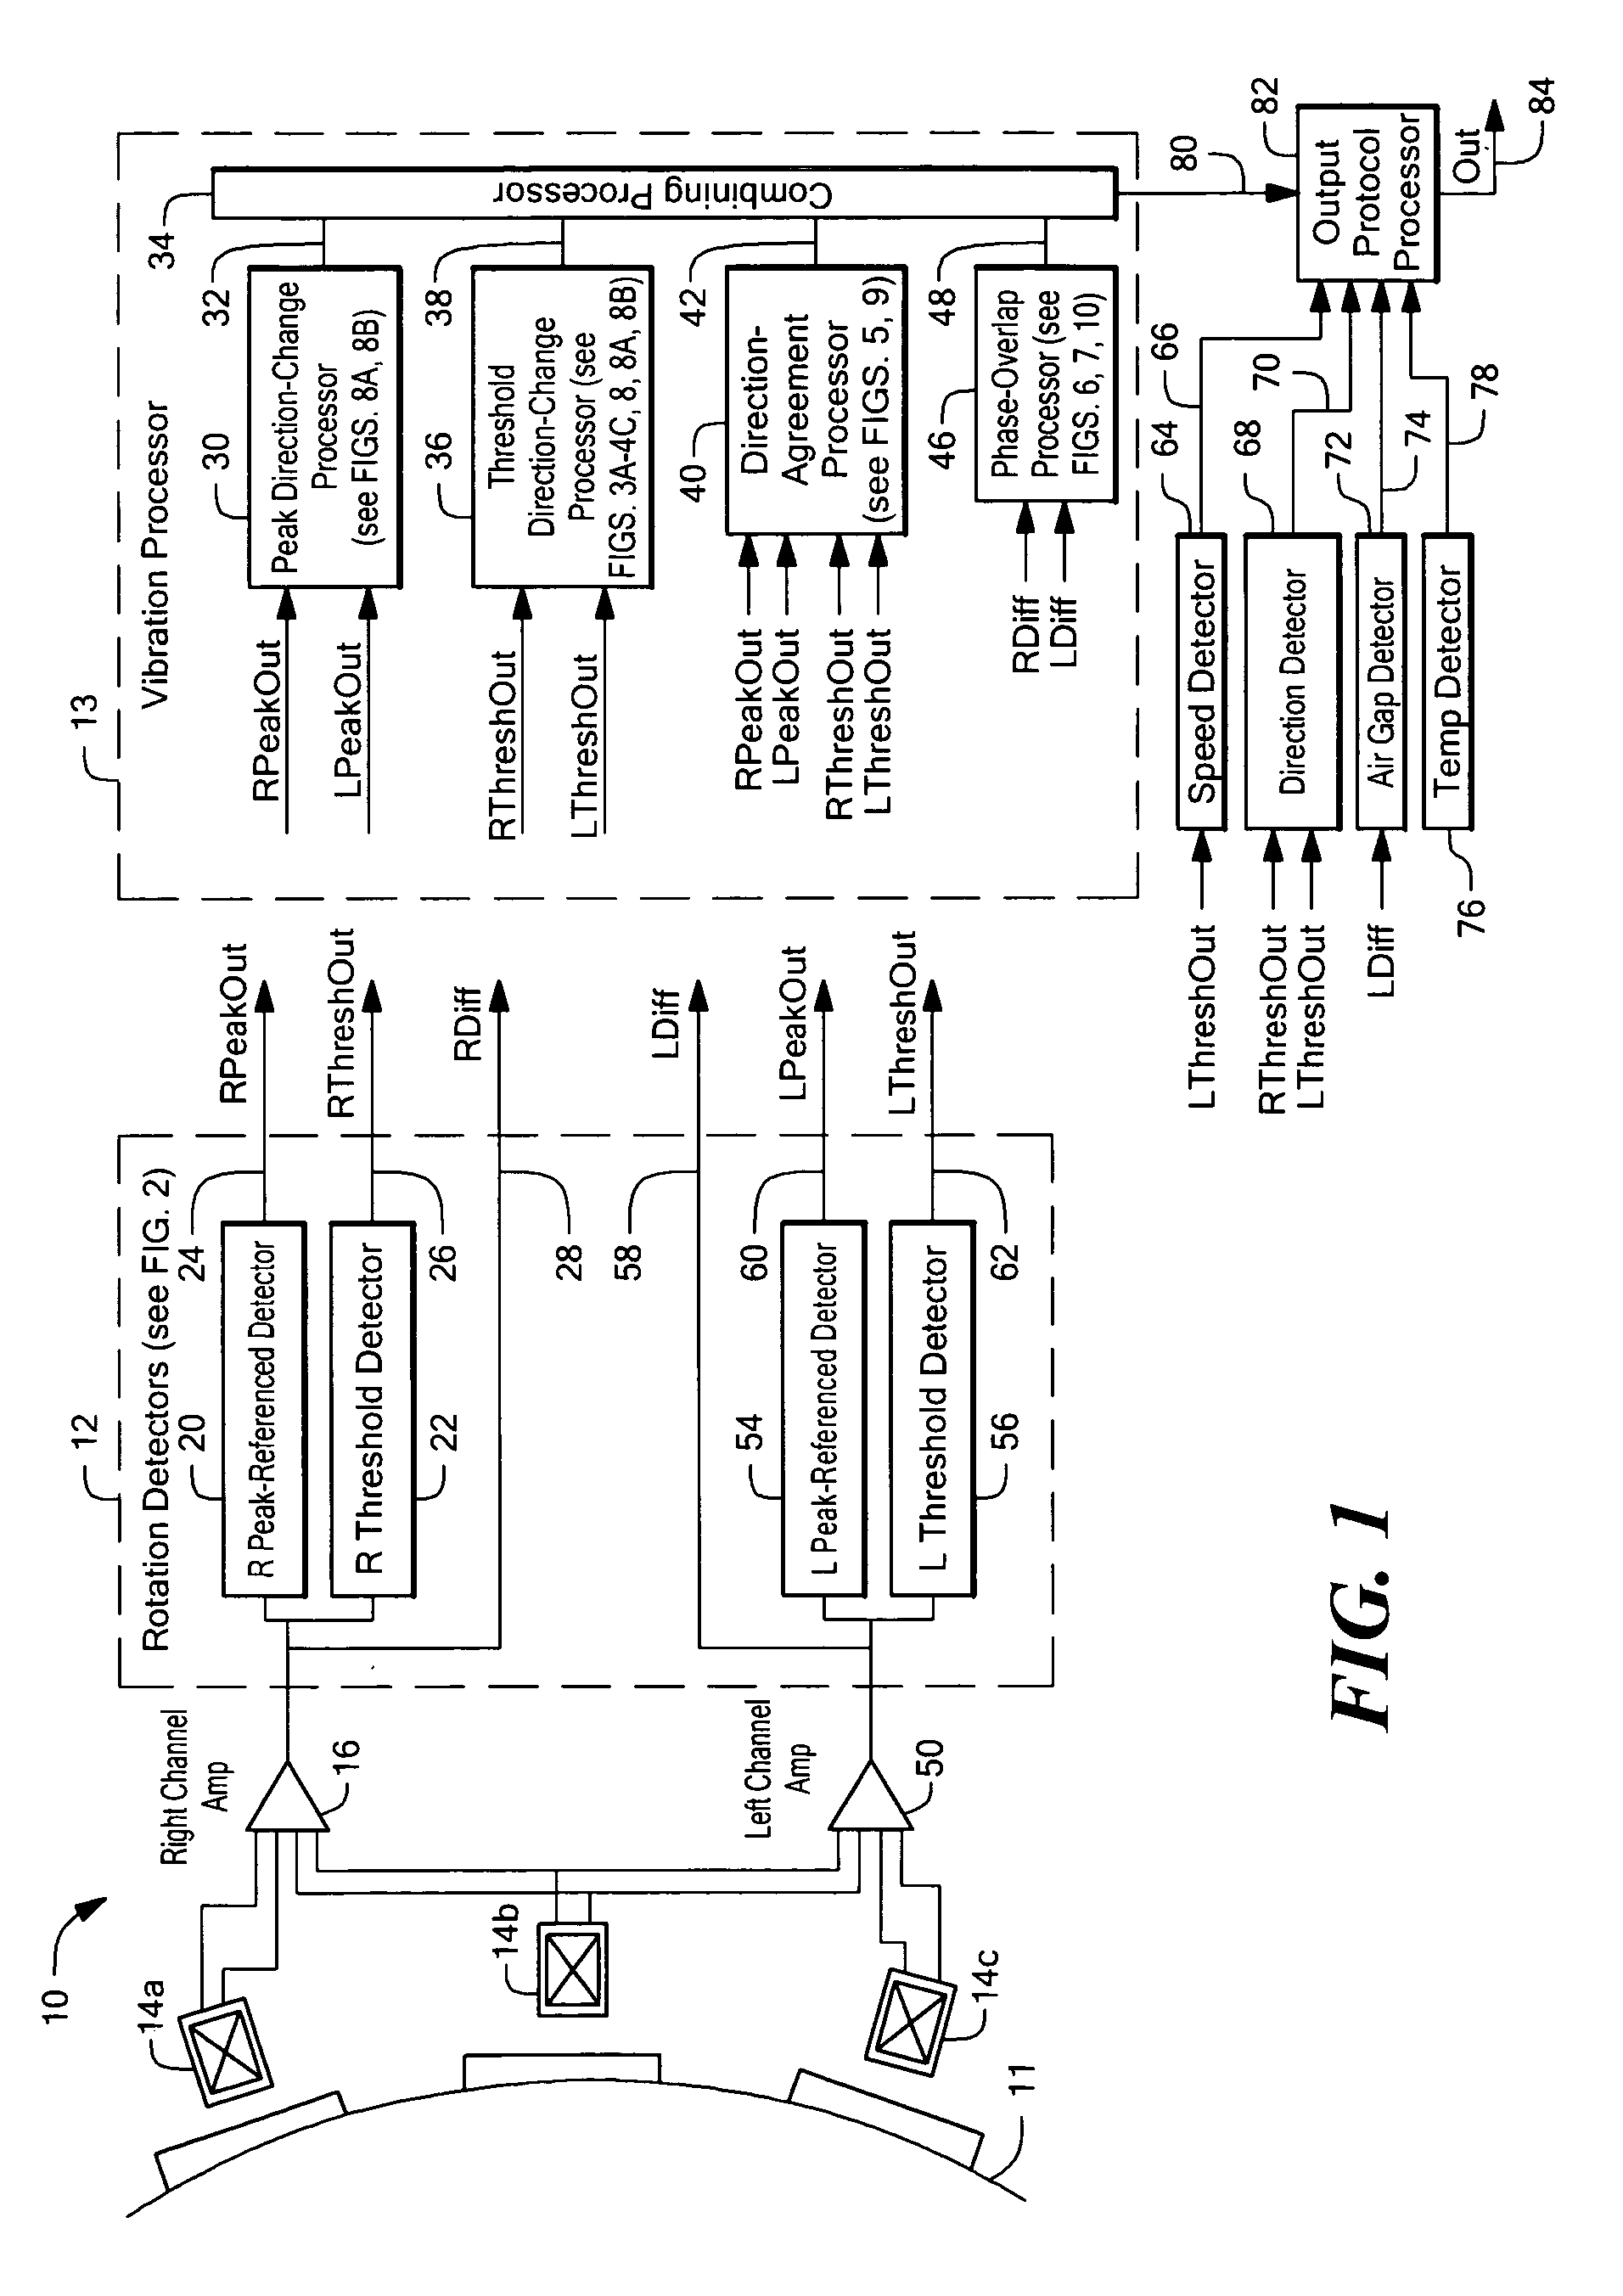 Methods and apparatus for vibration detection